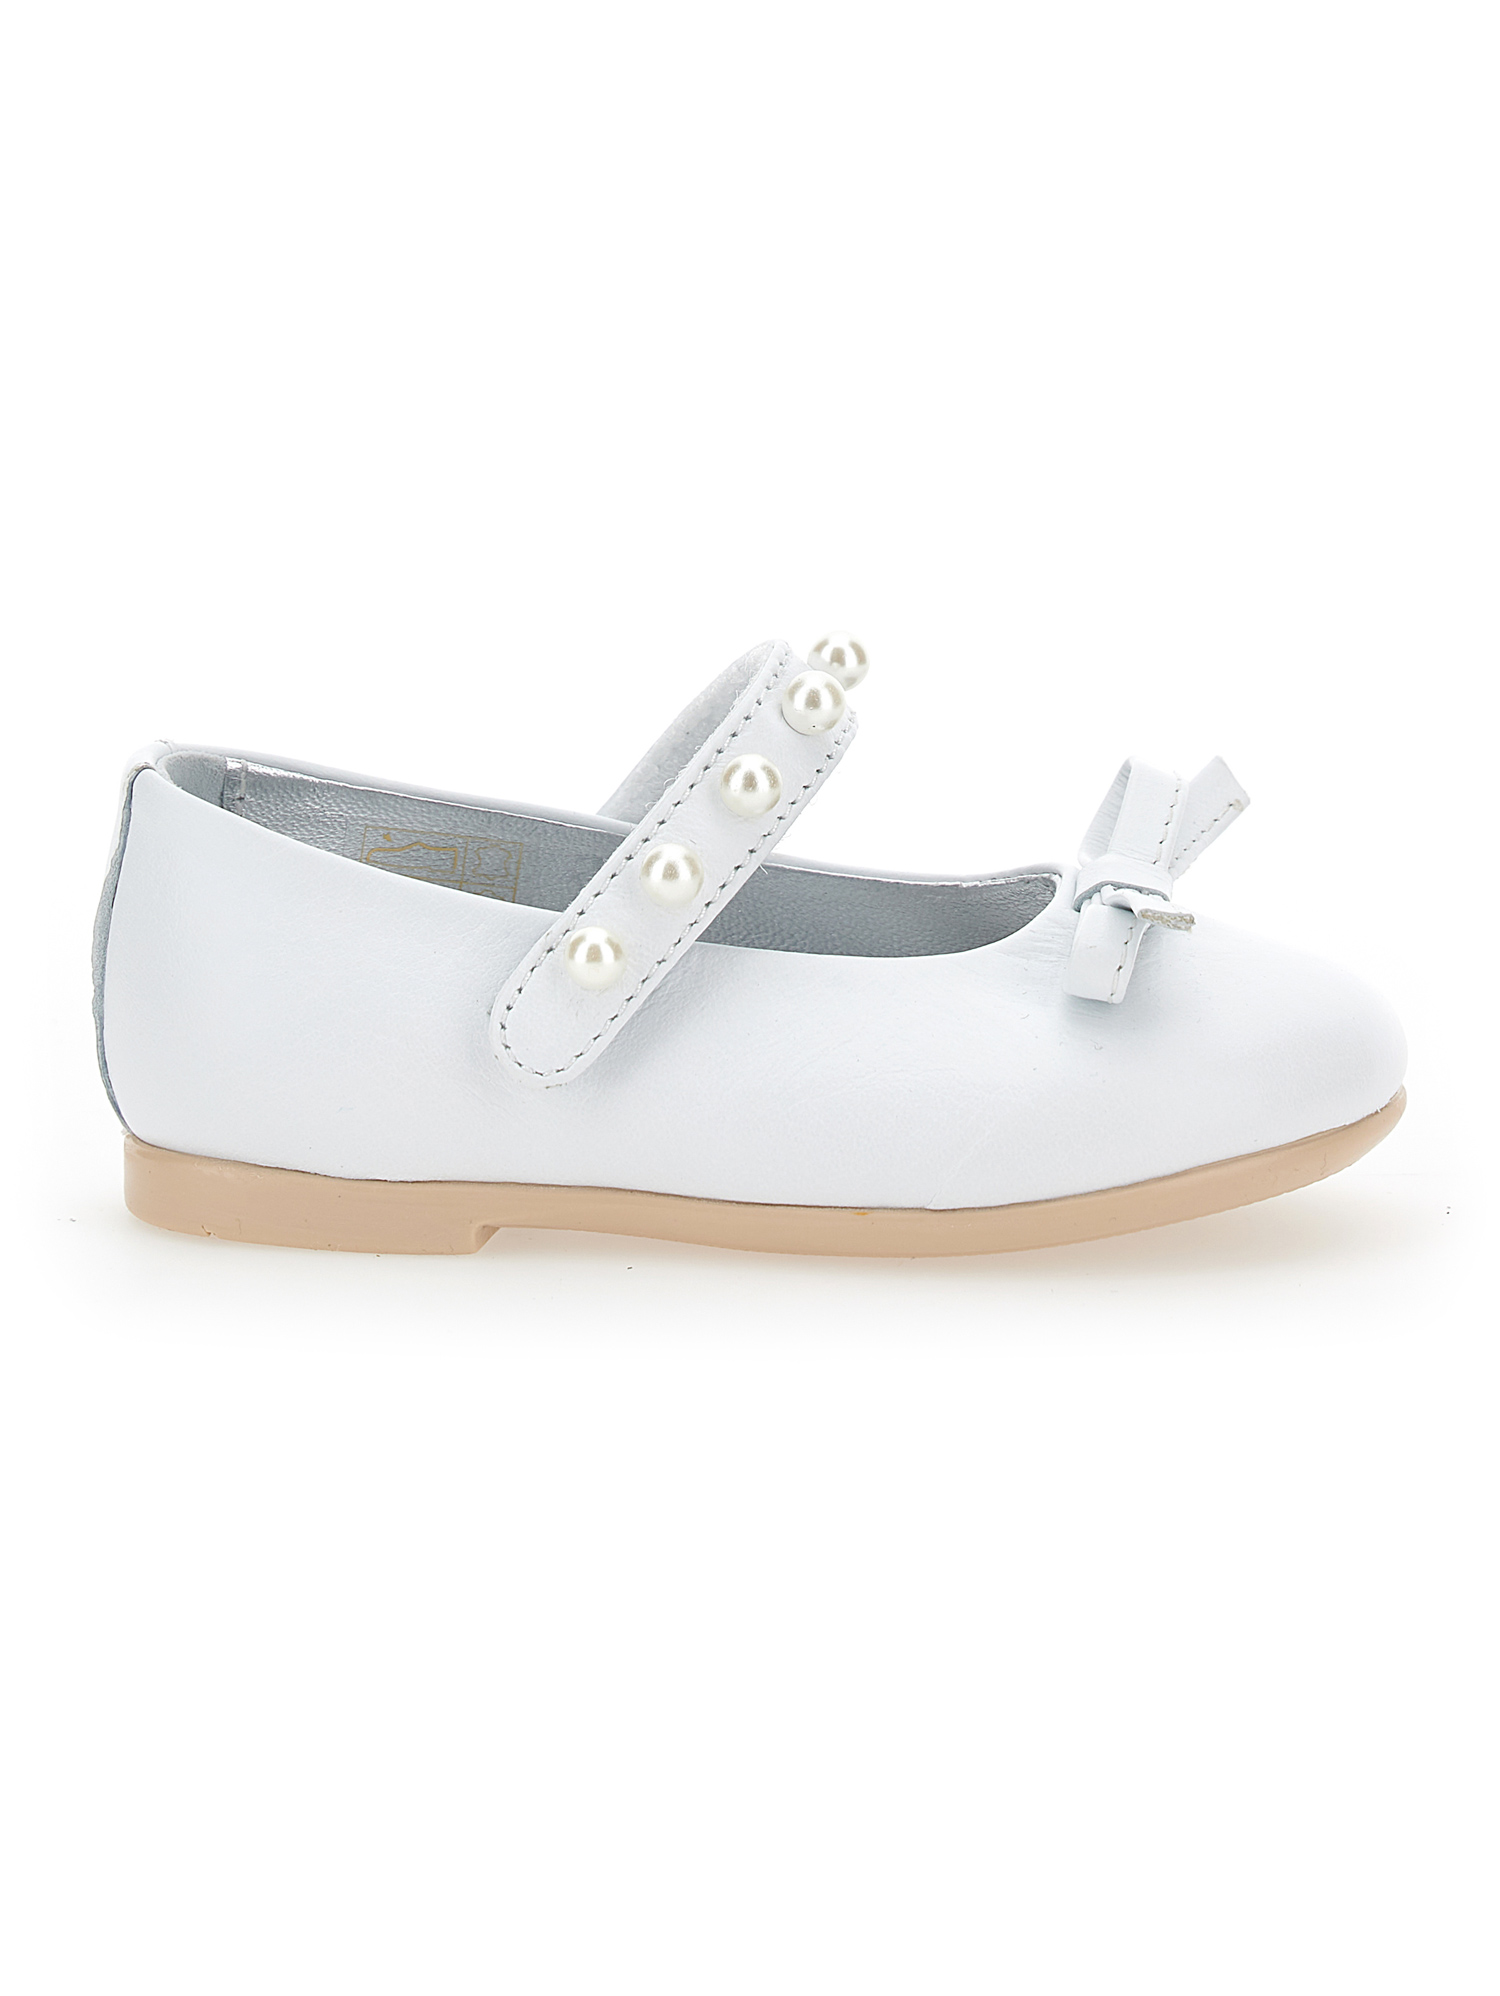 Monnalisa Laminated Leather Ballet Flats With Pearls In Cream